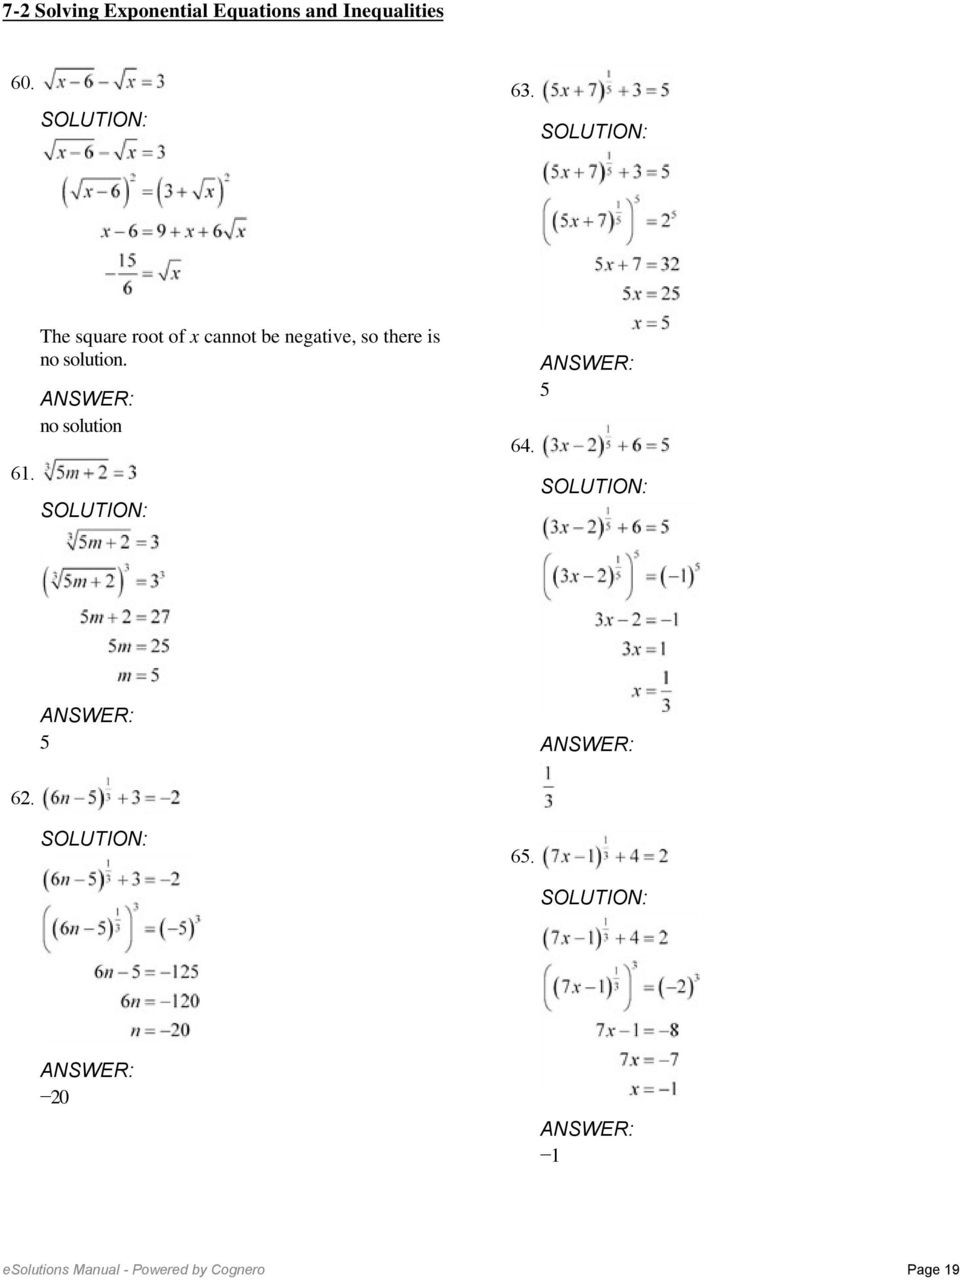 Solving Equations and Inequalities Worksheet solving Exponential Equations and Inequalities Worksheet Key